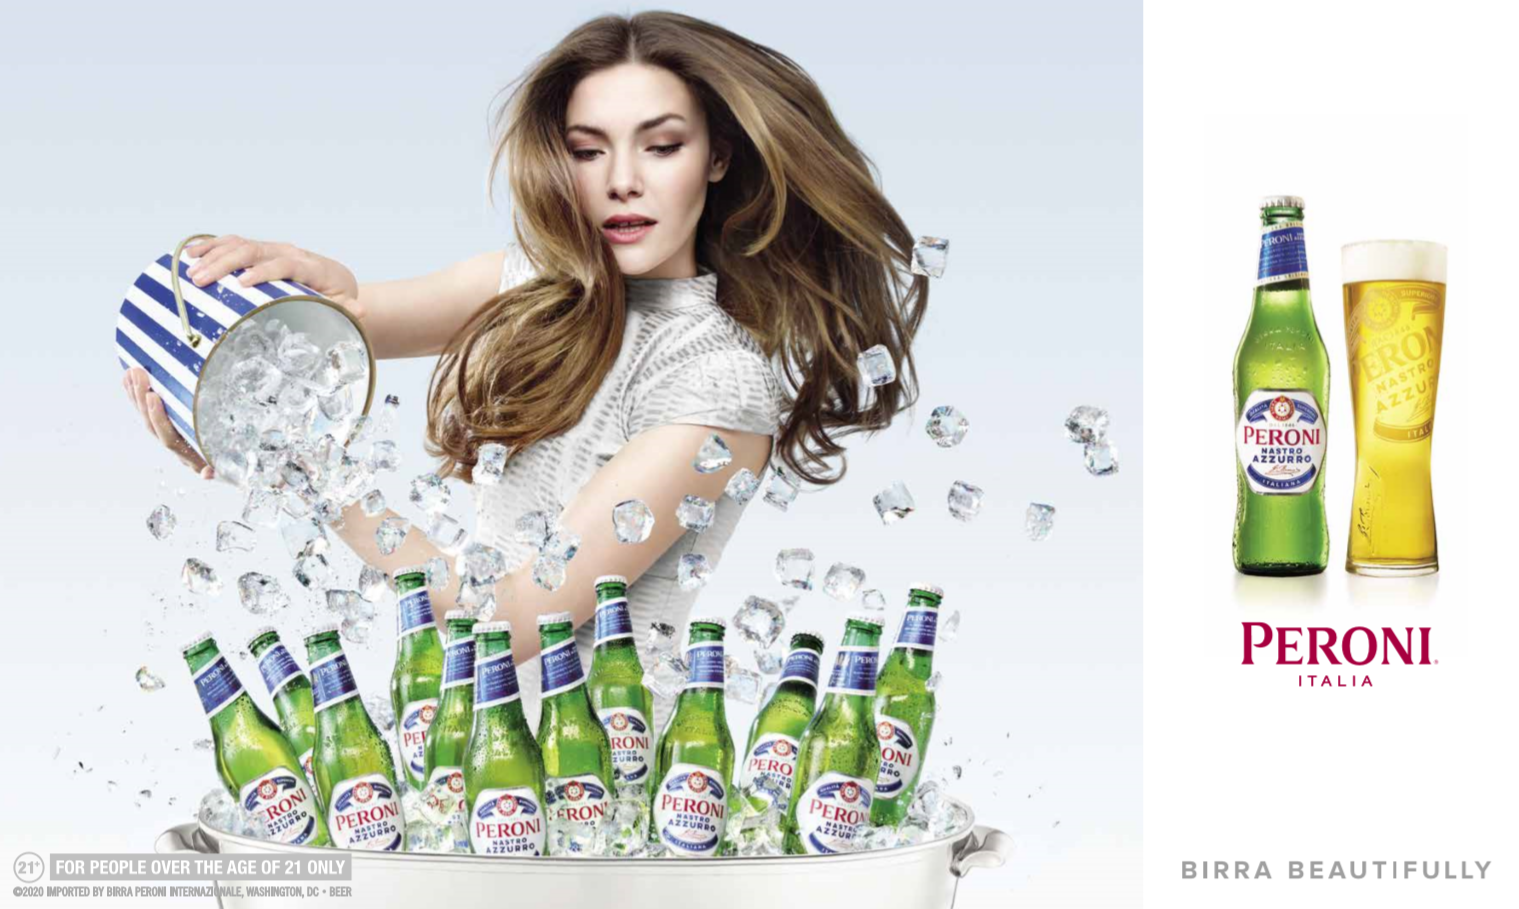 coming-off-a-record-2019-peroni-makes-bigger-investment-in-2020